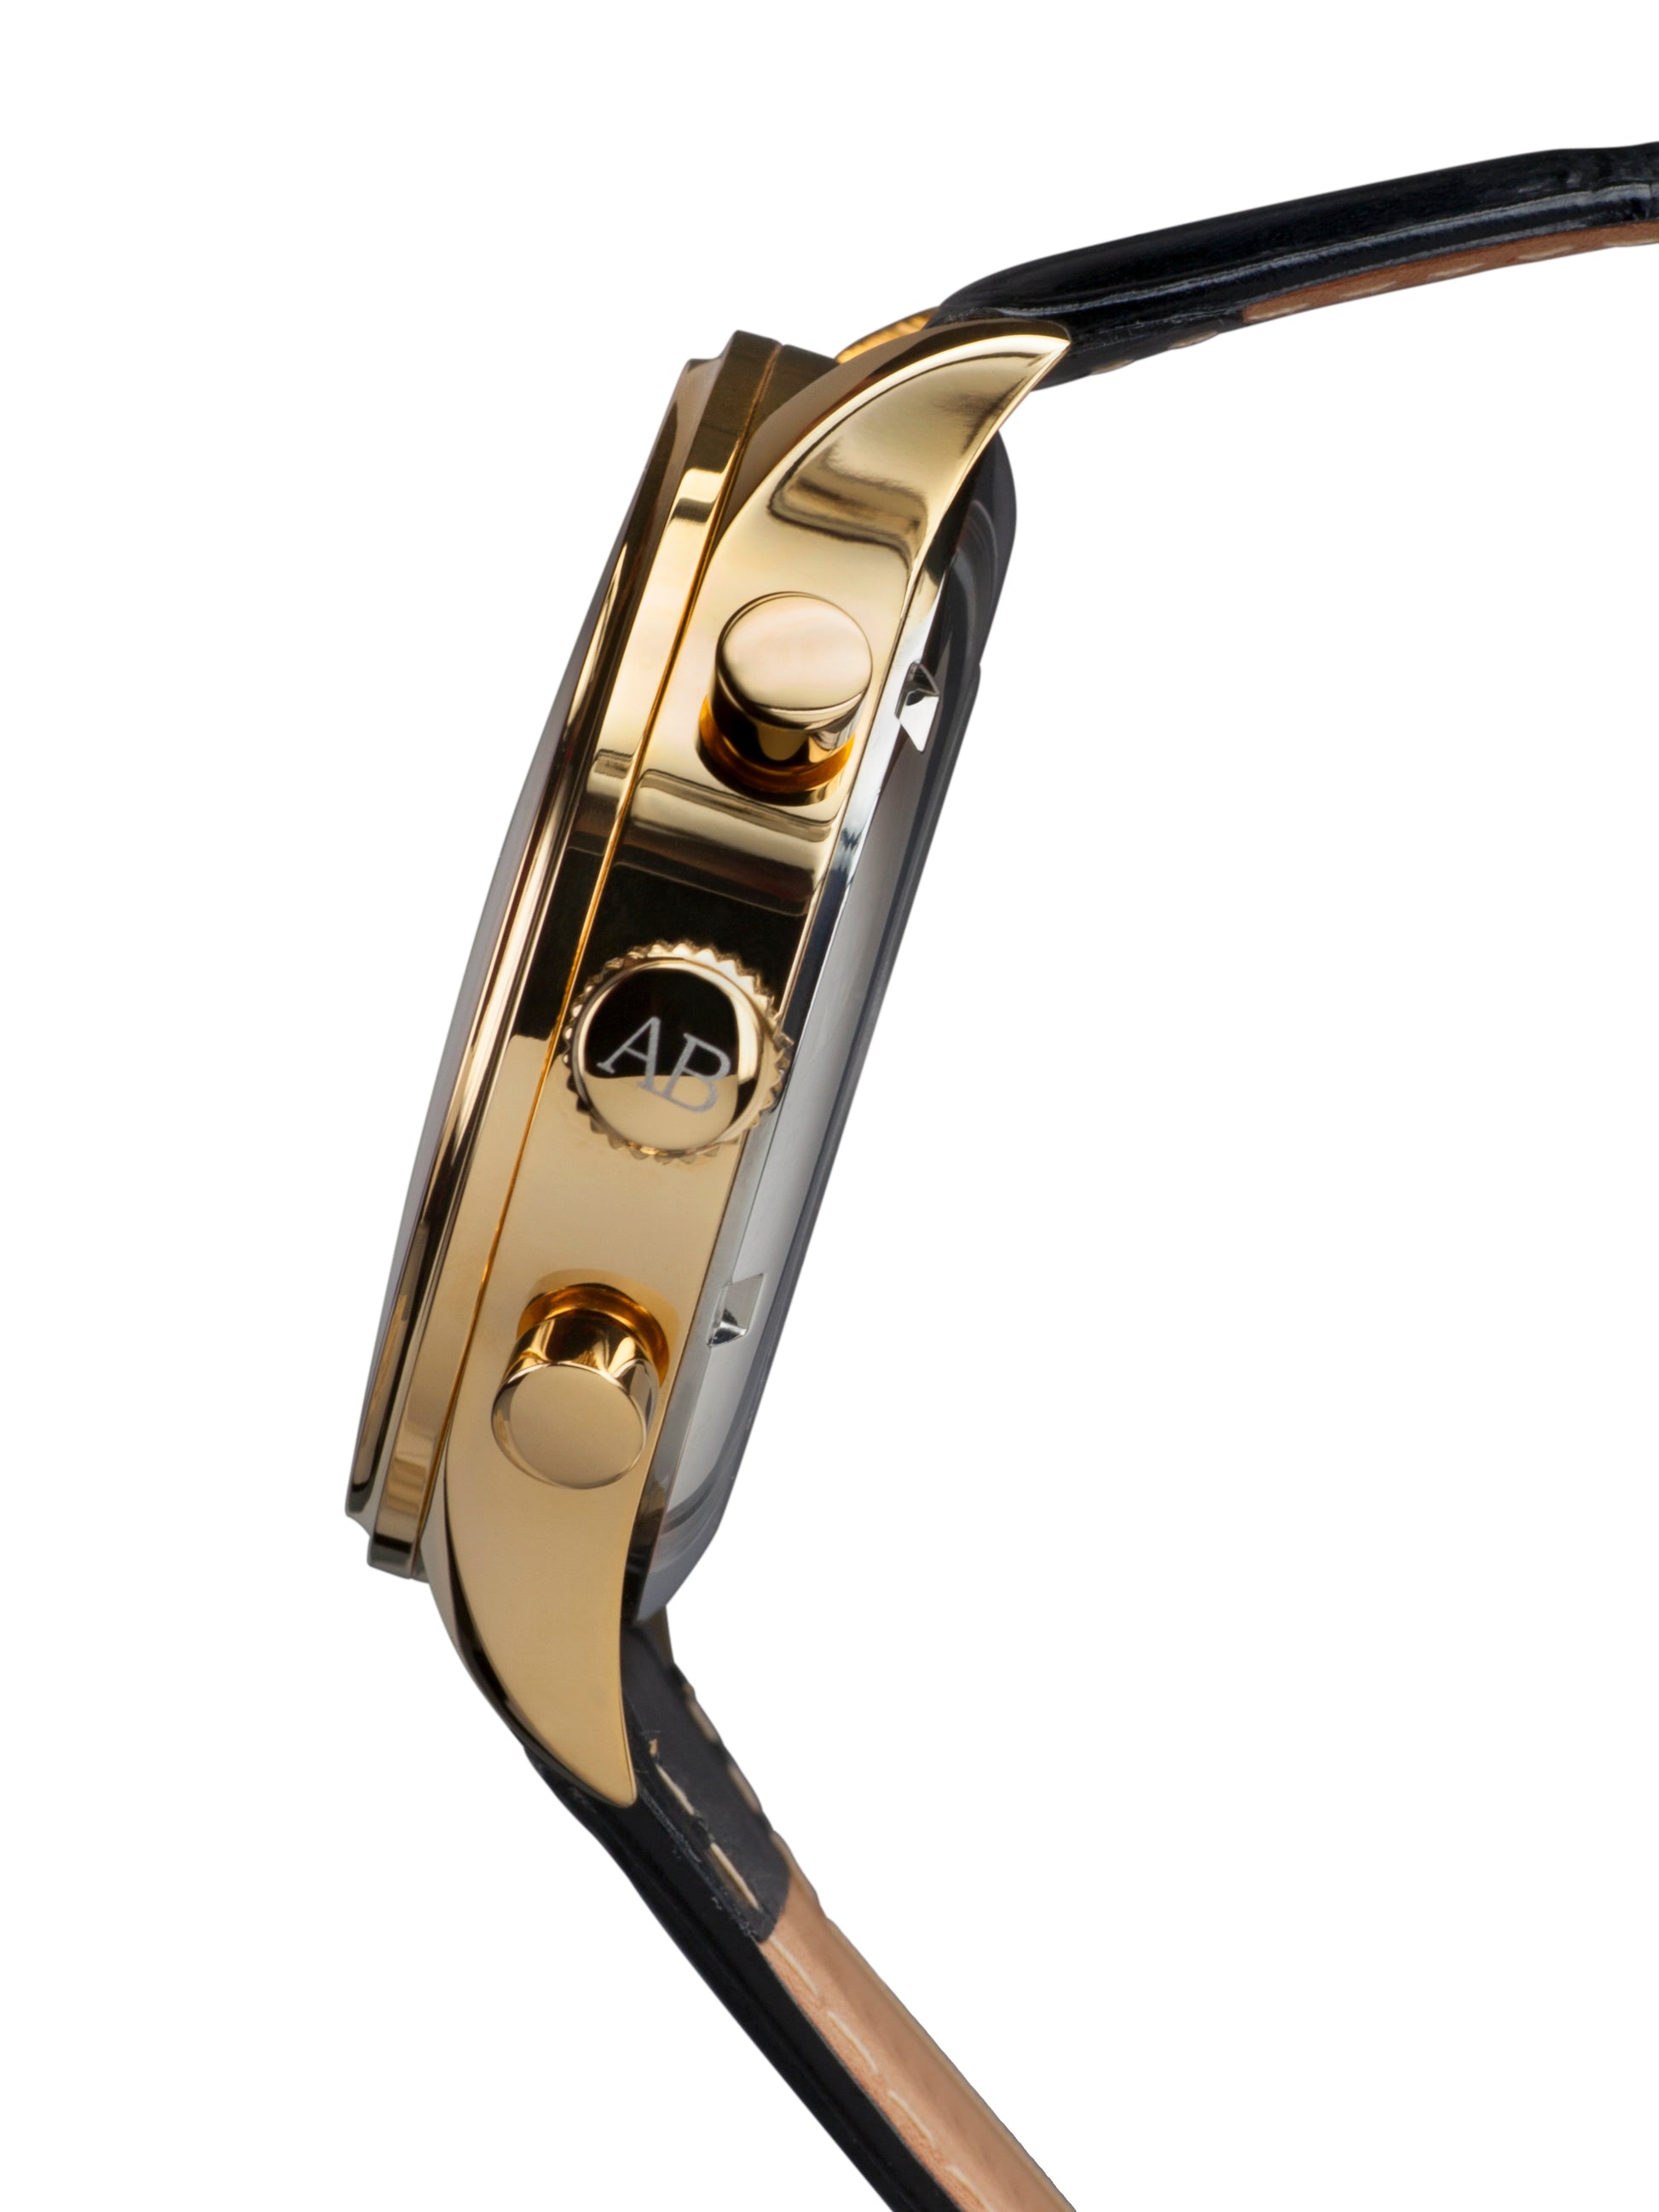 Automatic watches — Calendrier — André Belfort — gold black